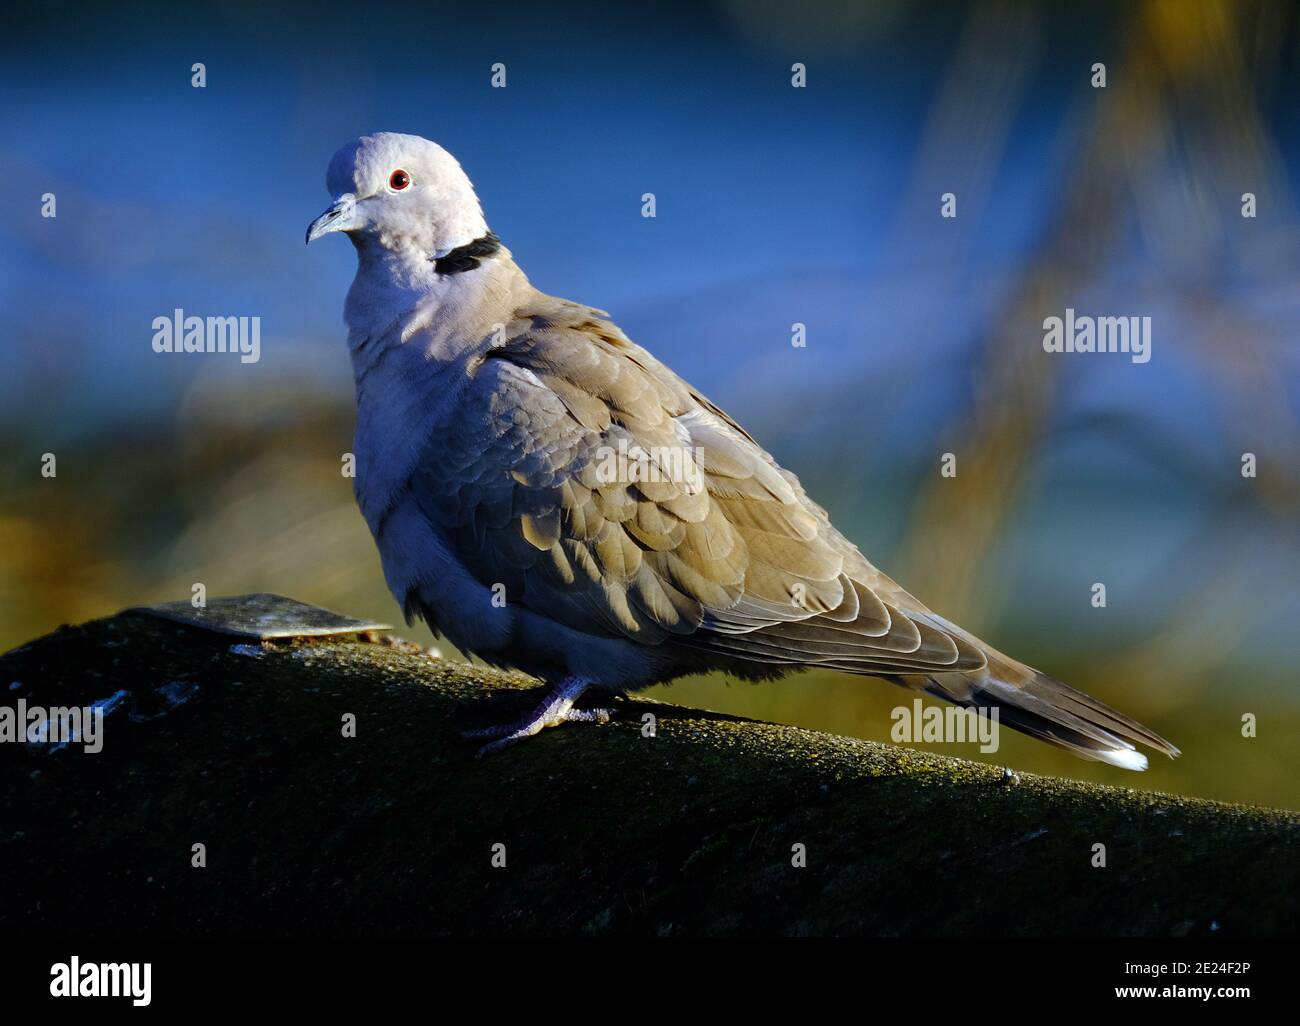 The Eurasian collared dove is a dove species native to Europe and Asia; it was introduced to Japan, North America and islands in the Caribbean Stock Photo